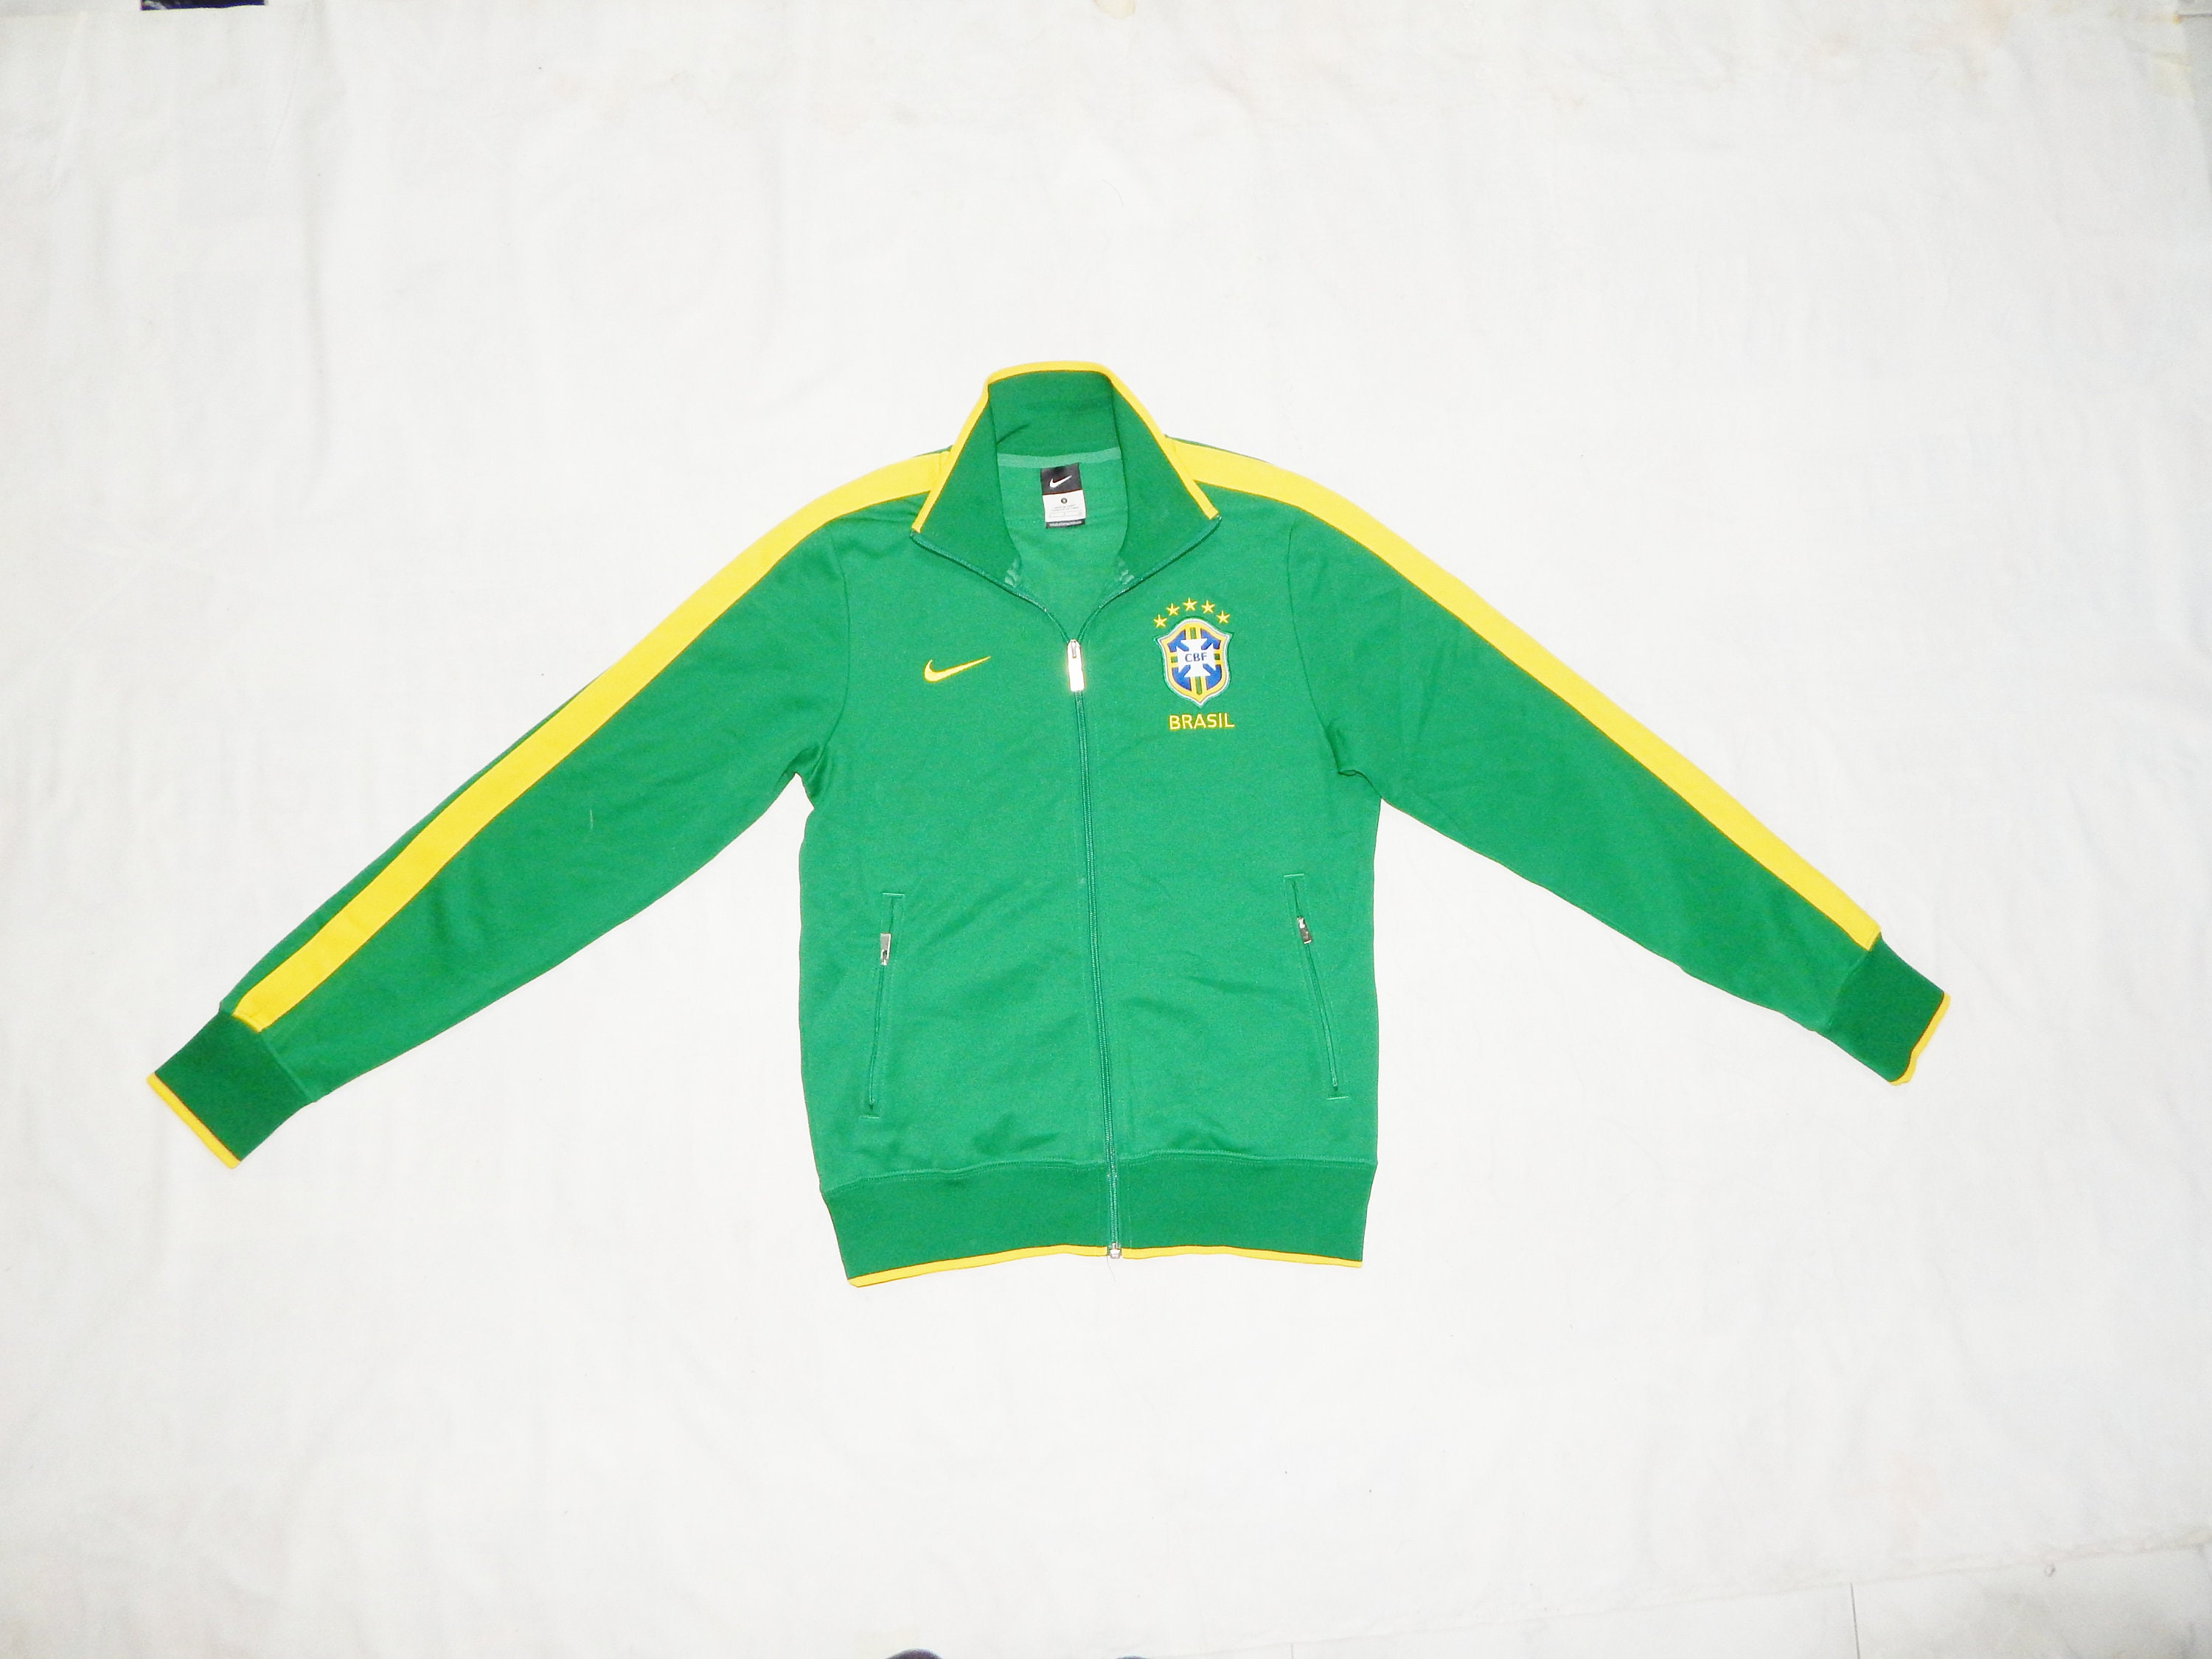 Nike Brasil Vintage Official Adult's Football Team Tracksuit Top Jacket ,  Size S, Green/yellow -  Canada